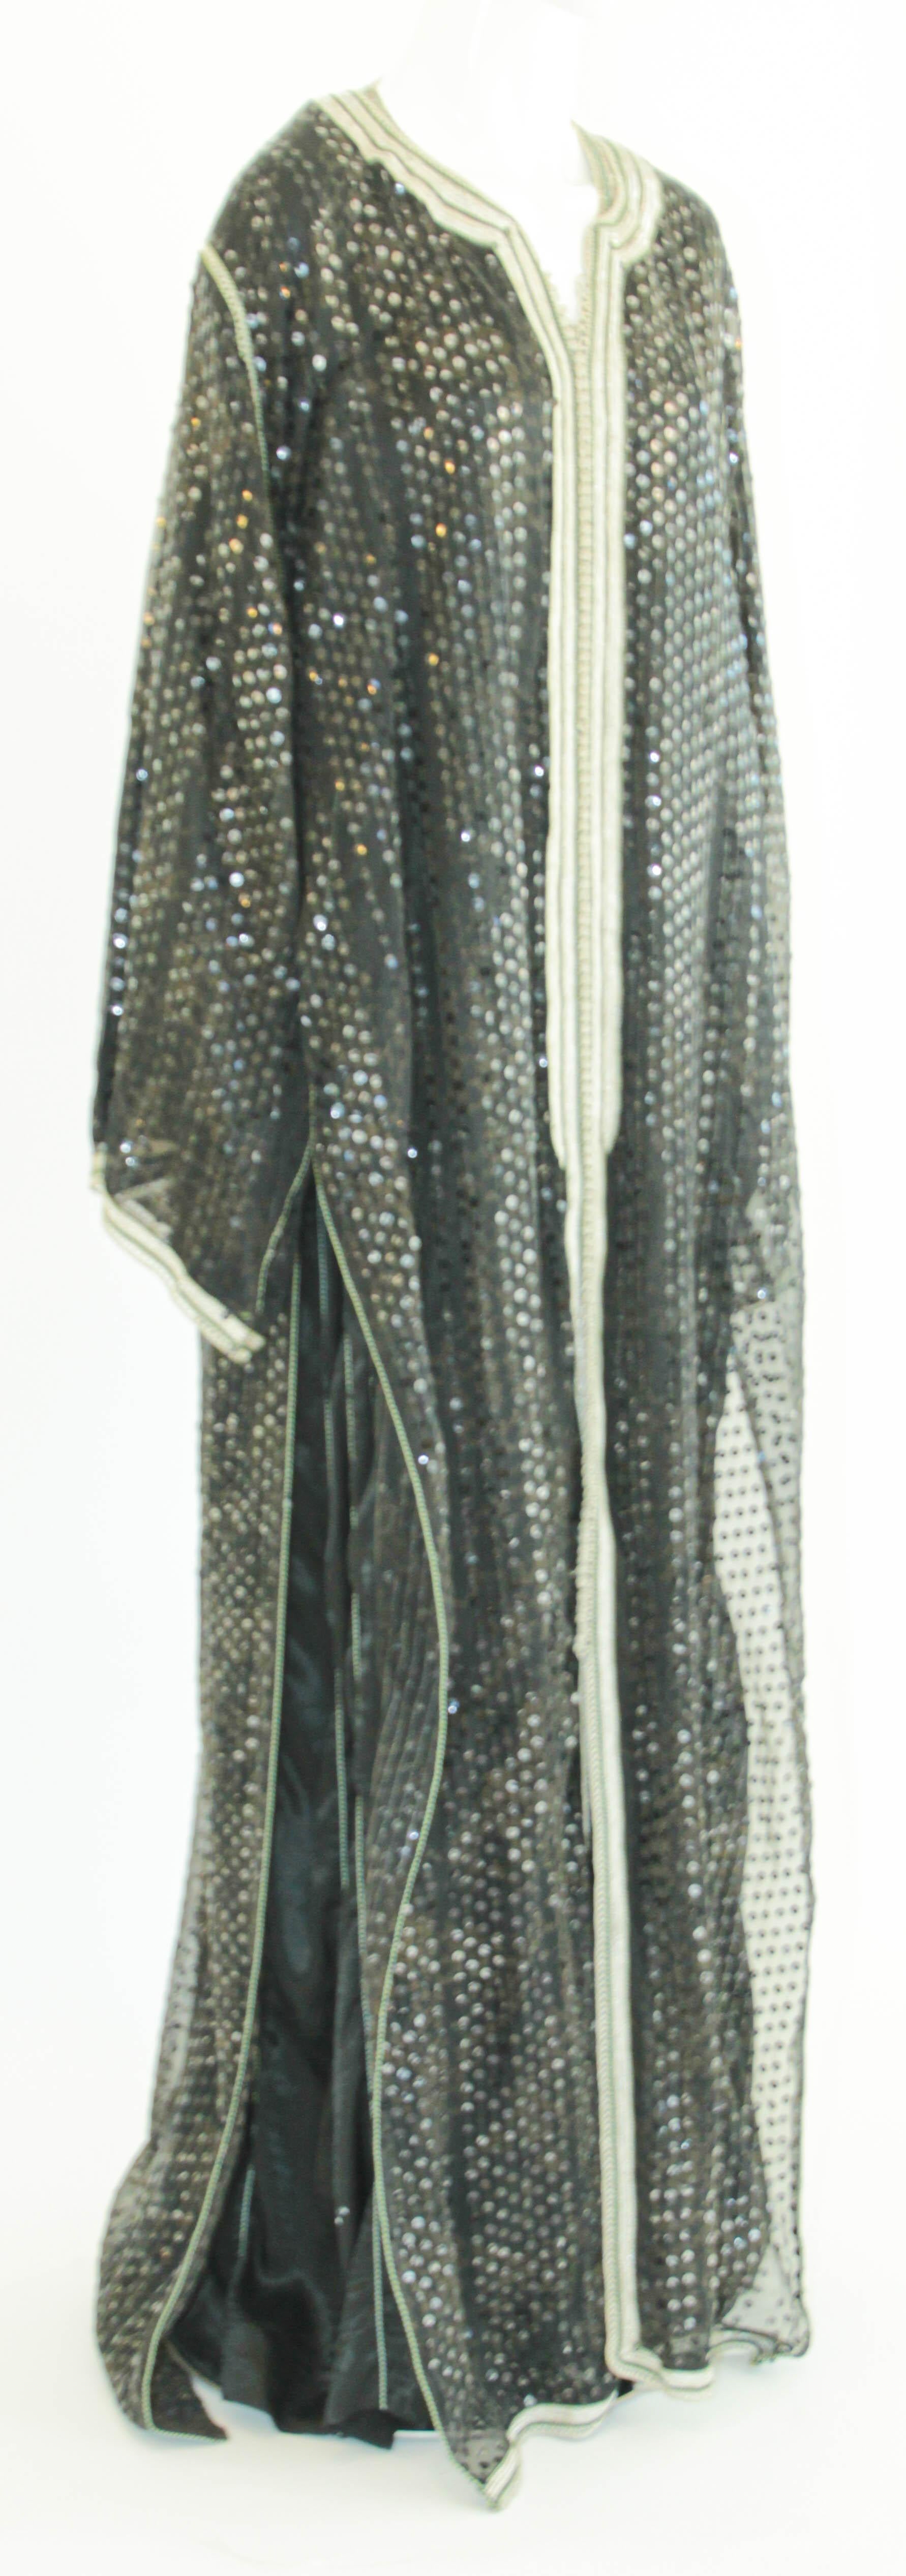 Elegant Moroccan caftan black sequin with silver embroidered rim.
This is a set of two dresses that you can wear together or separate,
circa 1980s.
This long maxi dress set kaftan has a silver embroidered rim and embellished entirely by hand.
One of